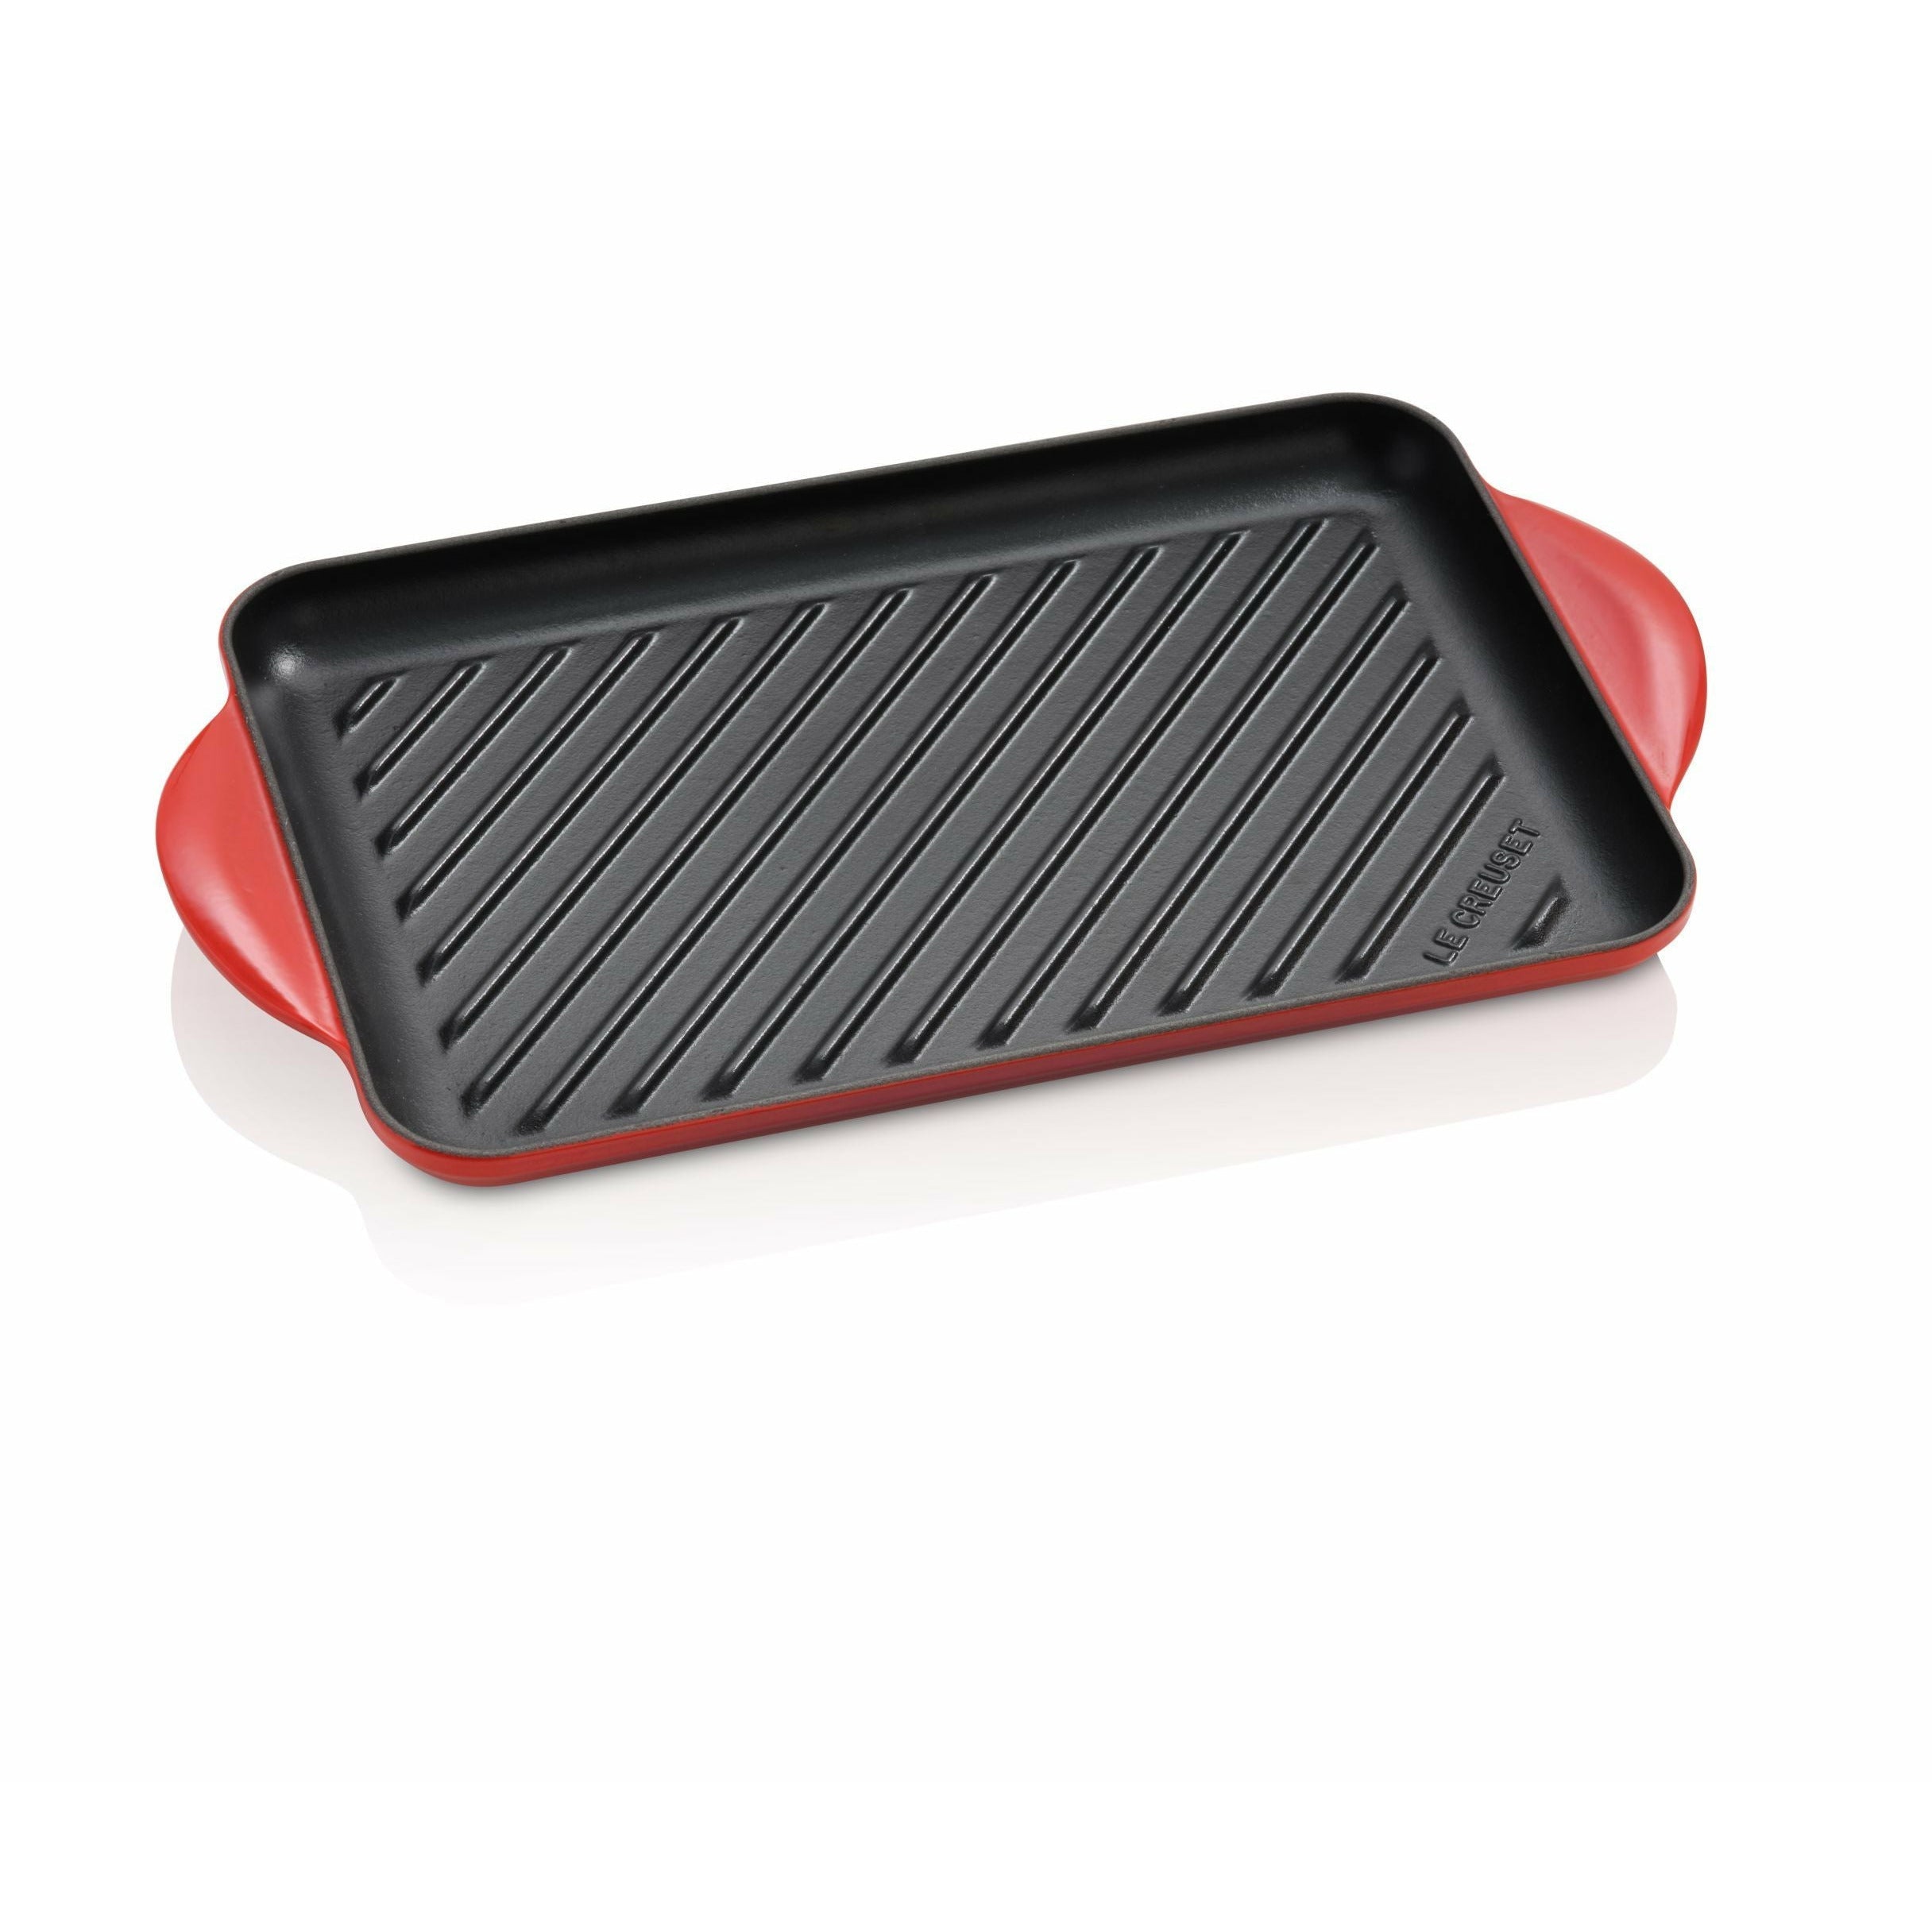 Tradice Le Creuset Rectangular Grill Plate 32 cm, Cherry Red